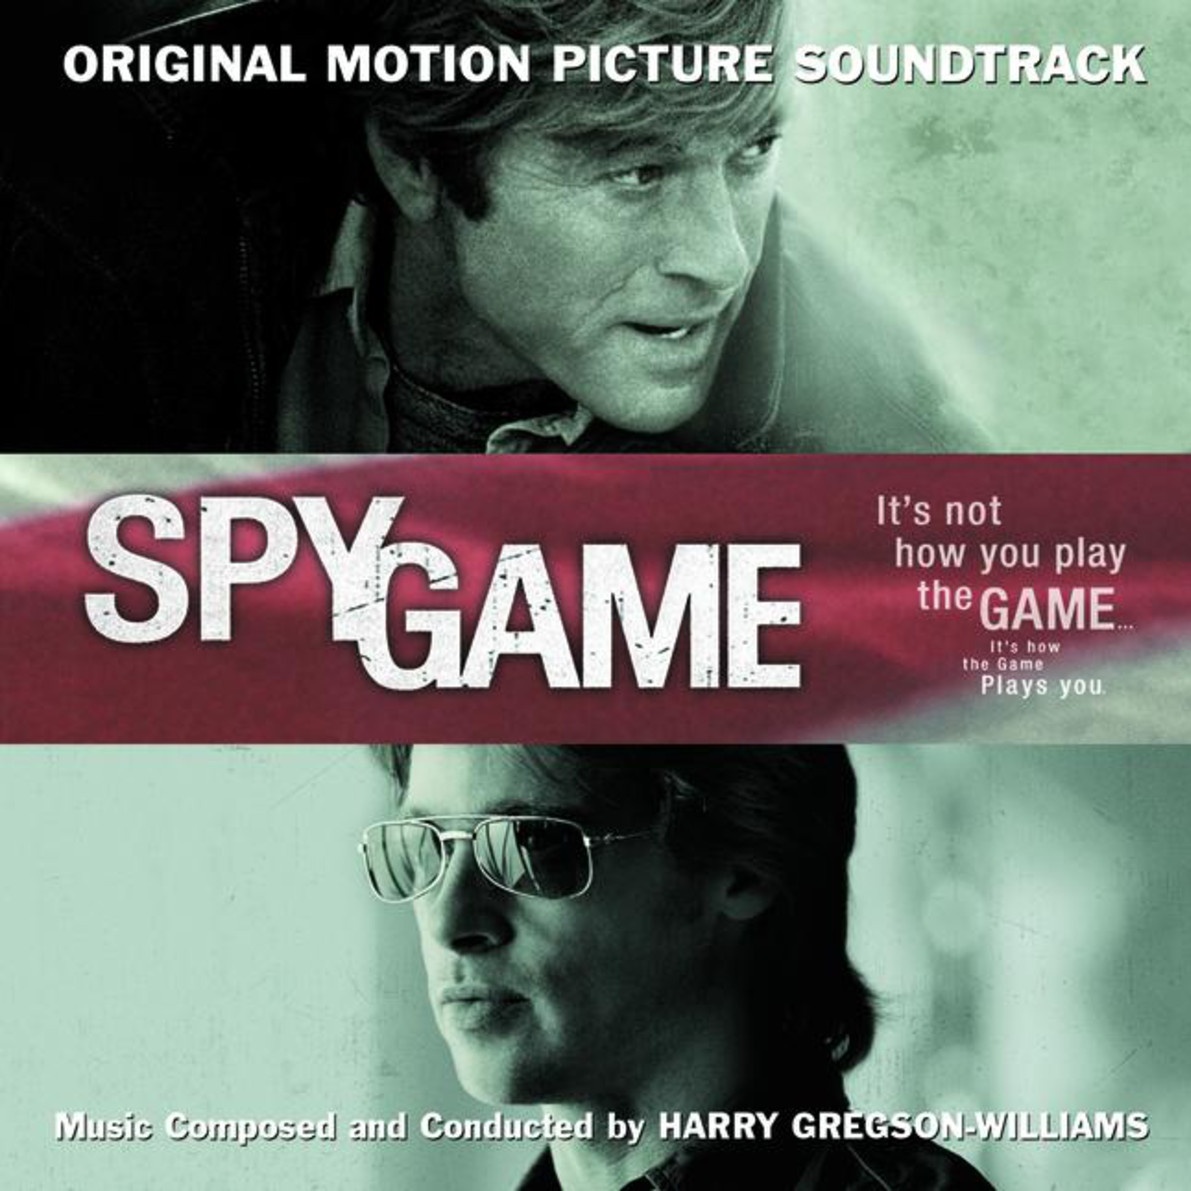 "It's Not A Game" - Original Motion Picture Soundtrack